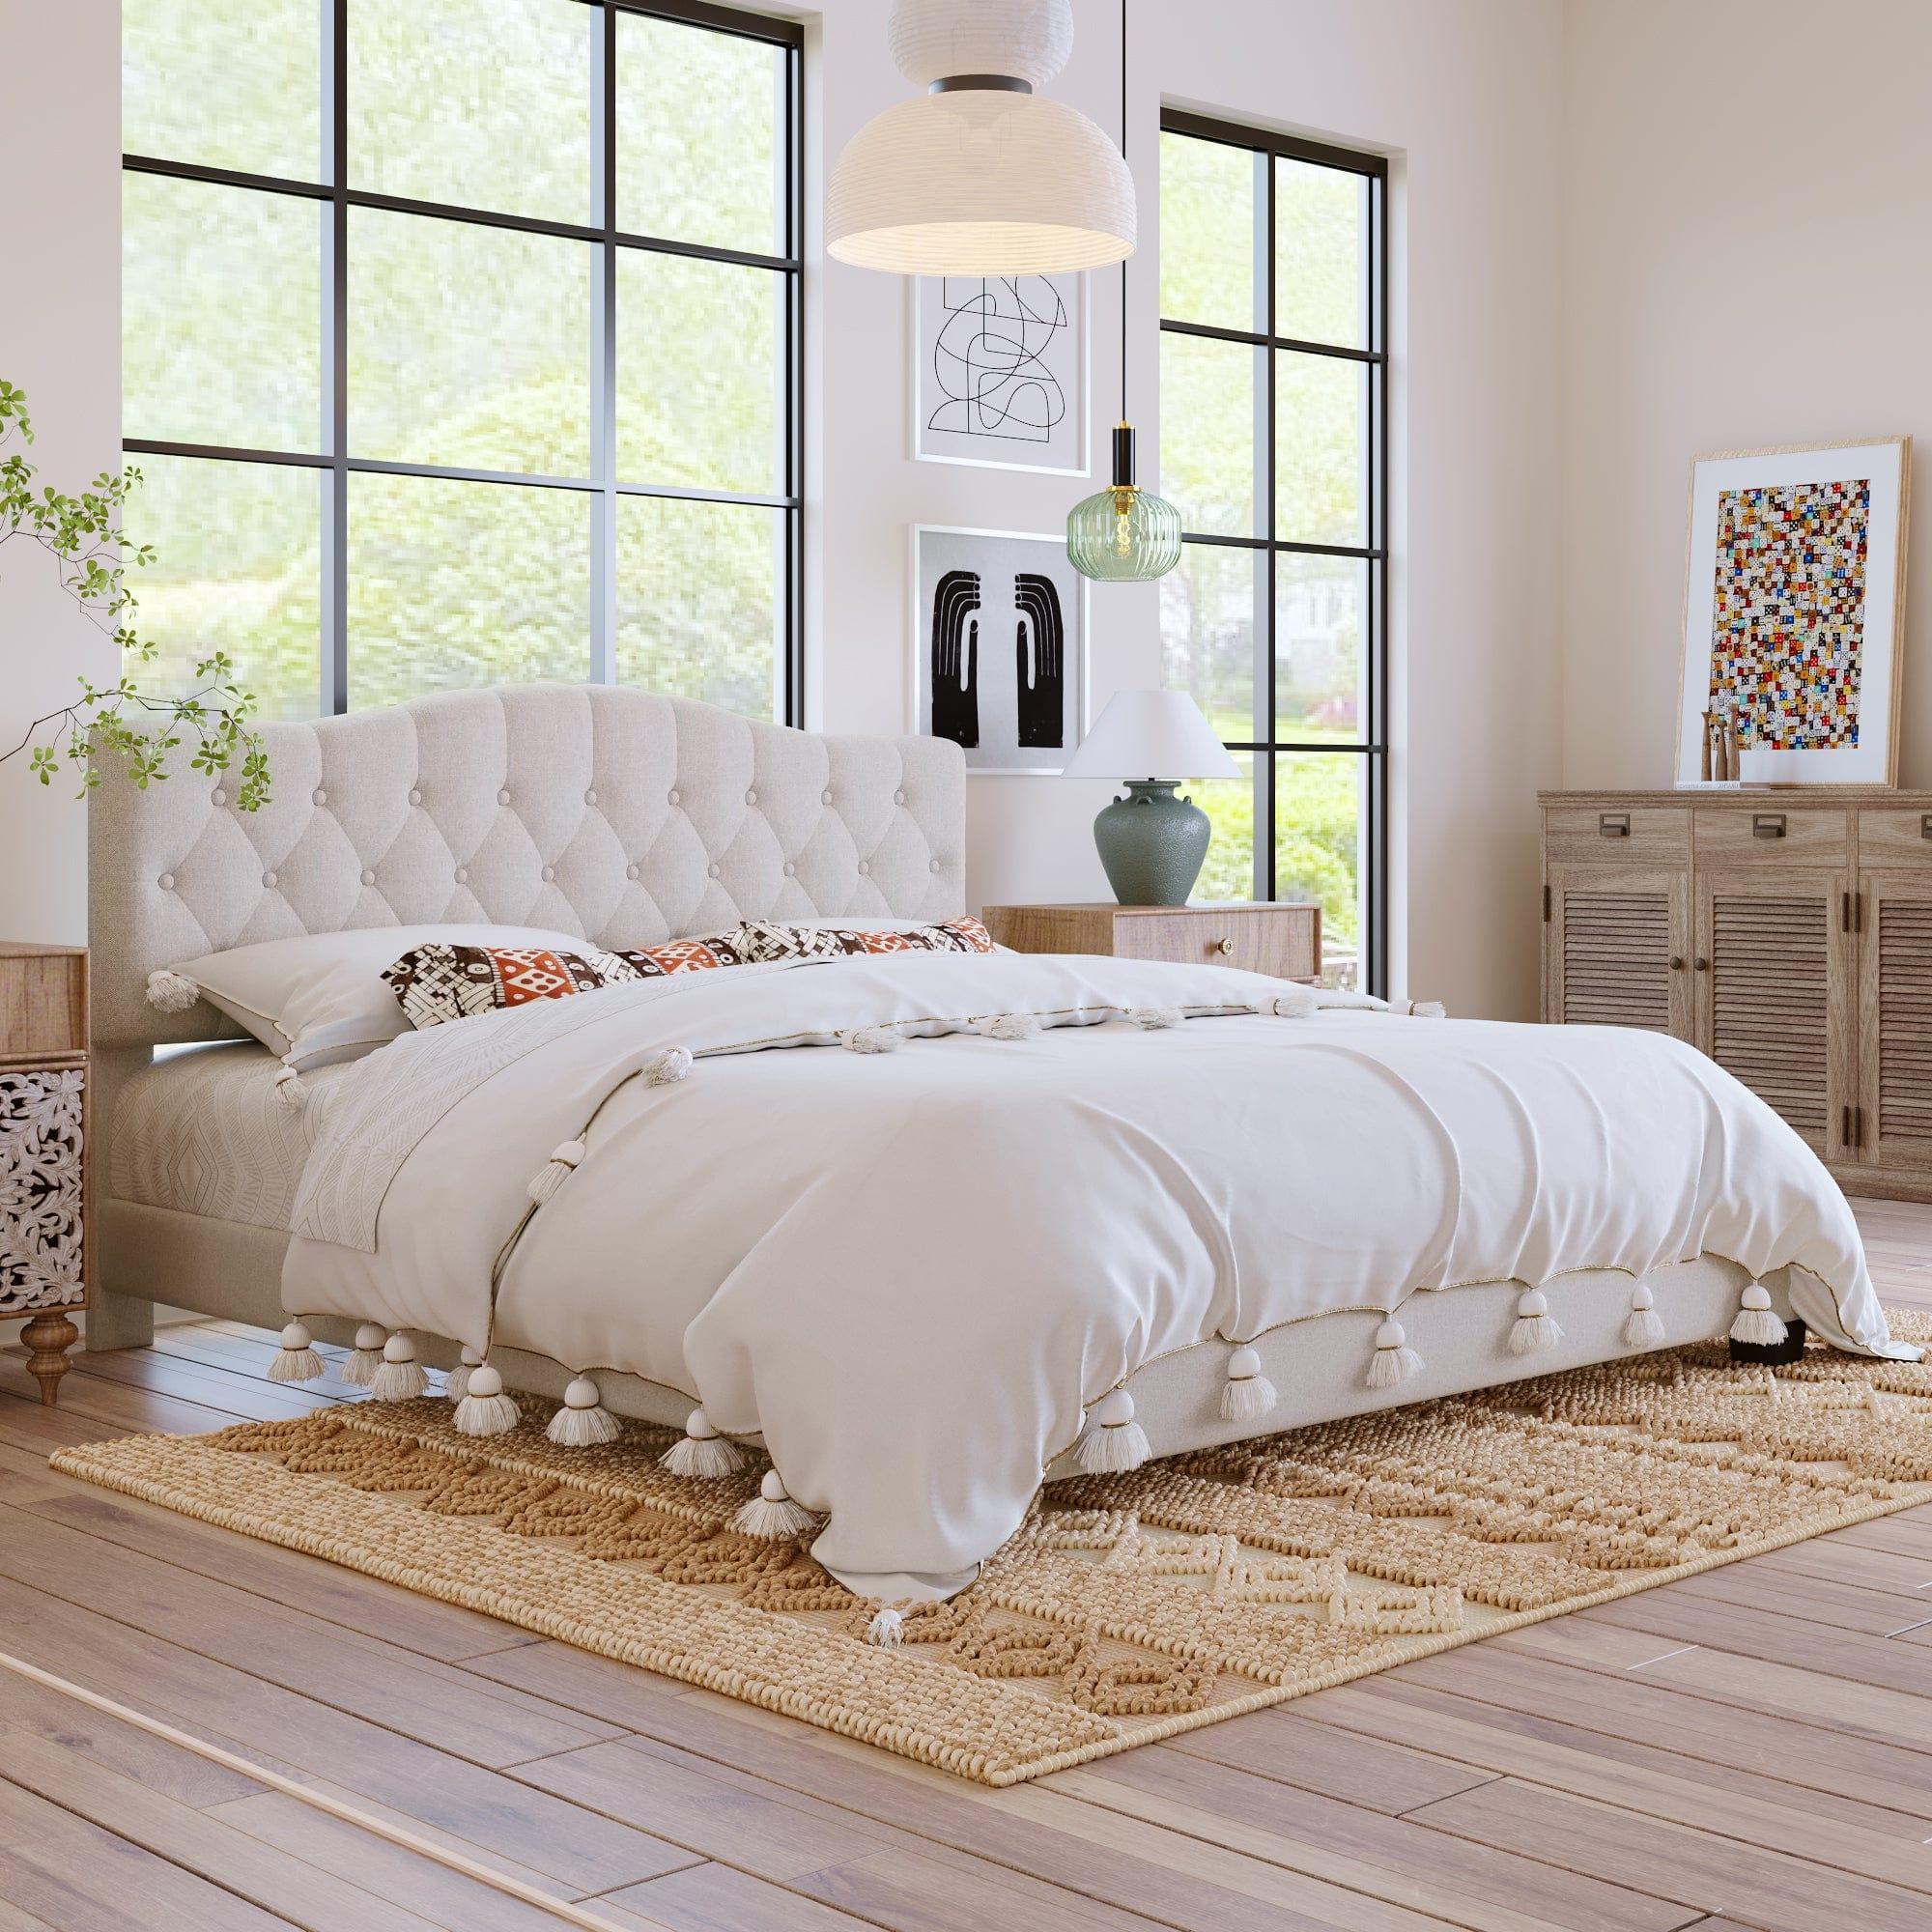 Shop Upholstered Platform Bed with Saddle Curved Headboard and Diamond Tufted Details, King, Beige Mademoiselle Home Decor